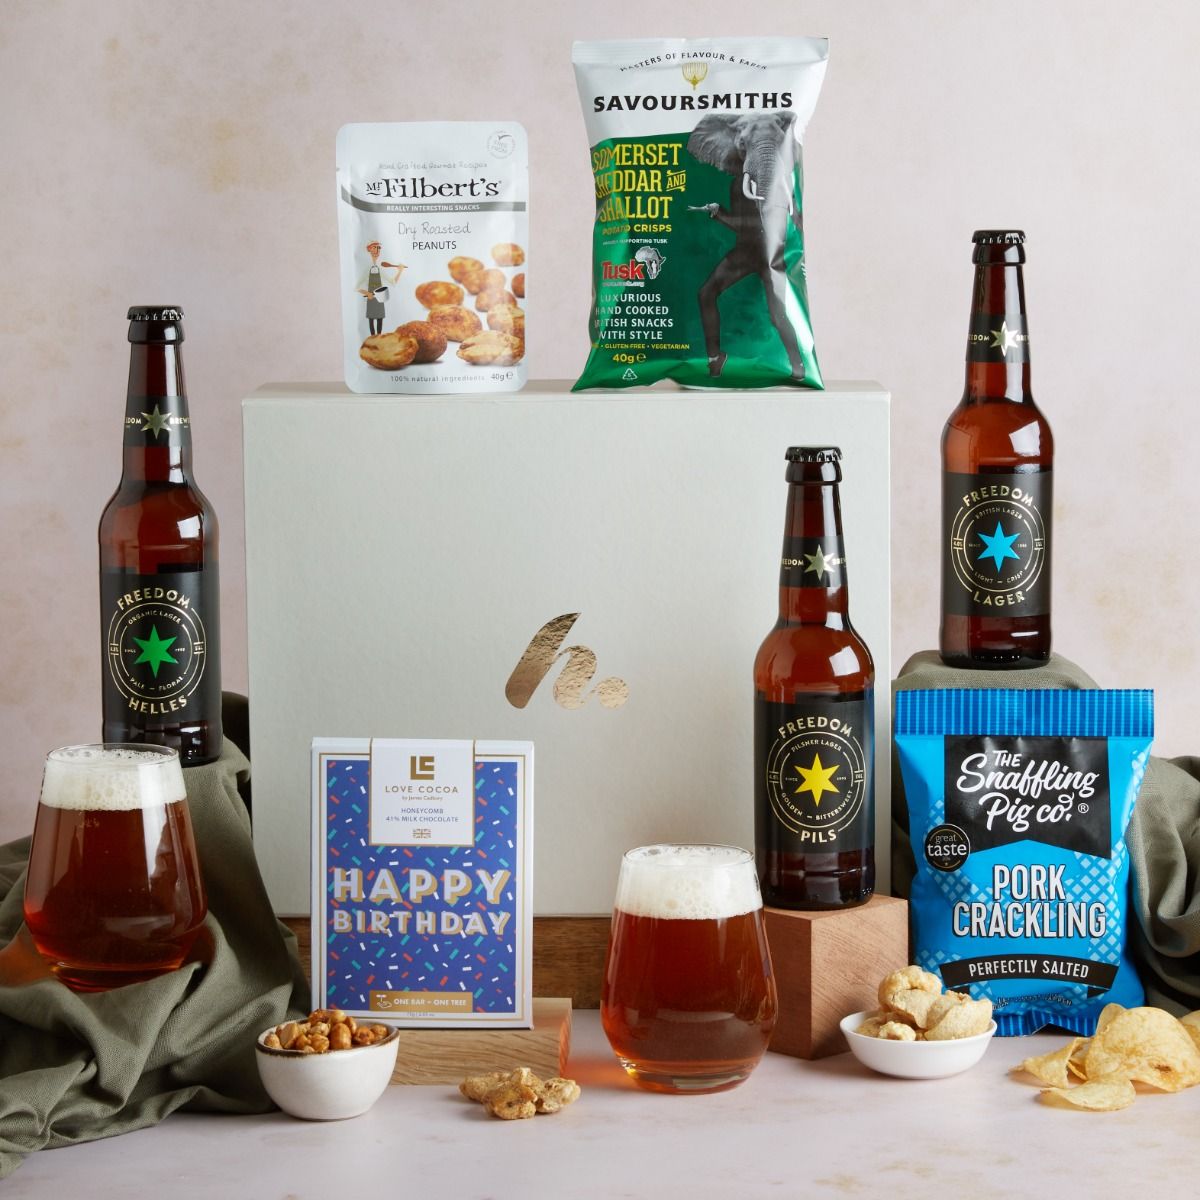 Happy Birthday Beer Hamper with contents on display